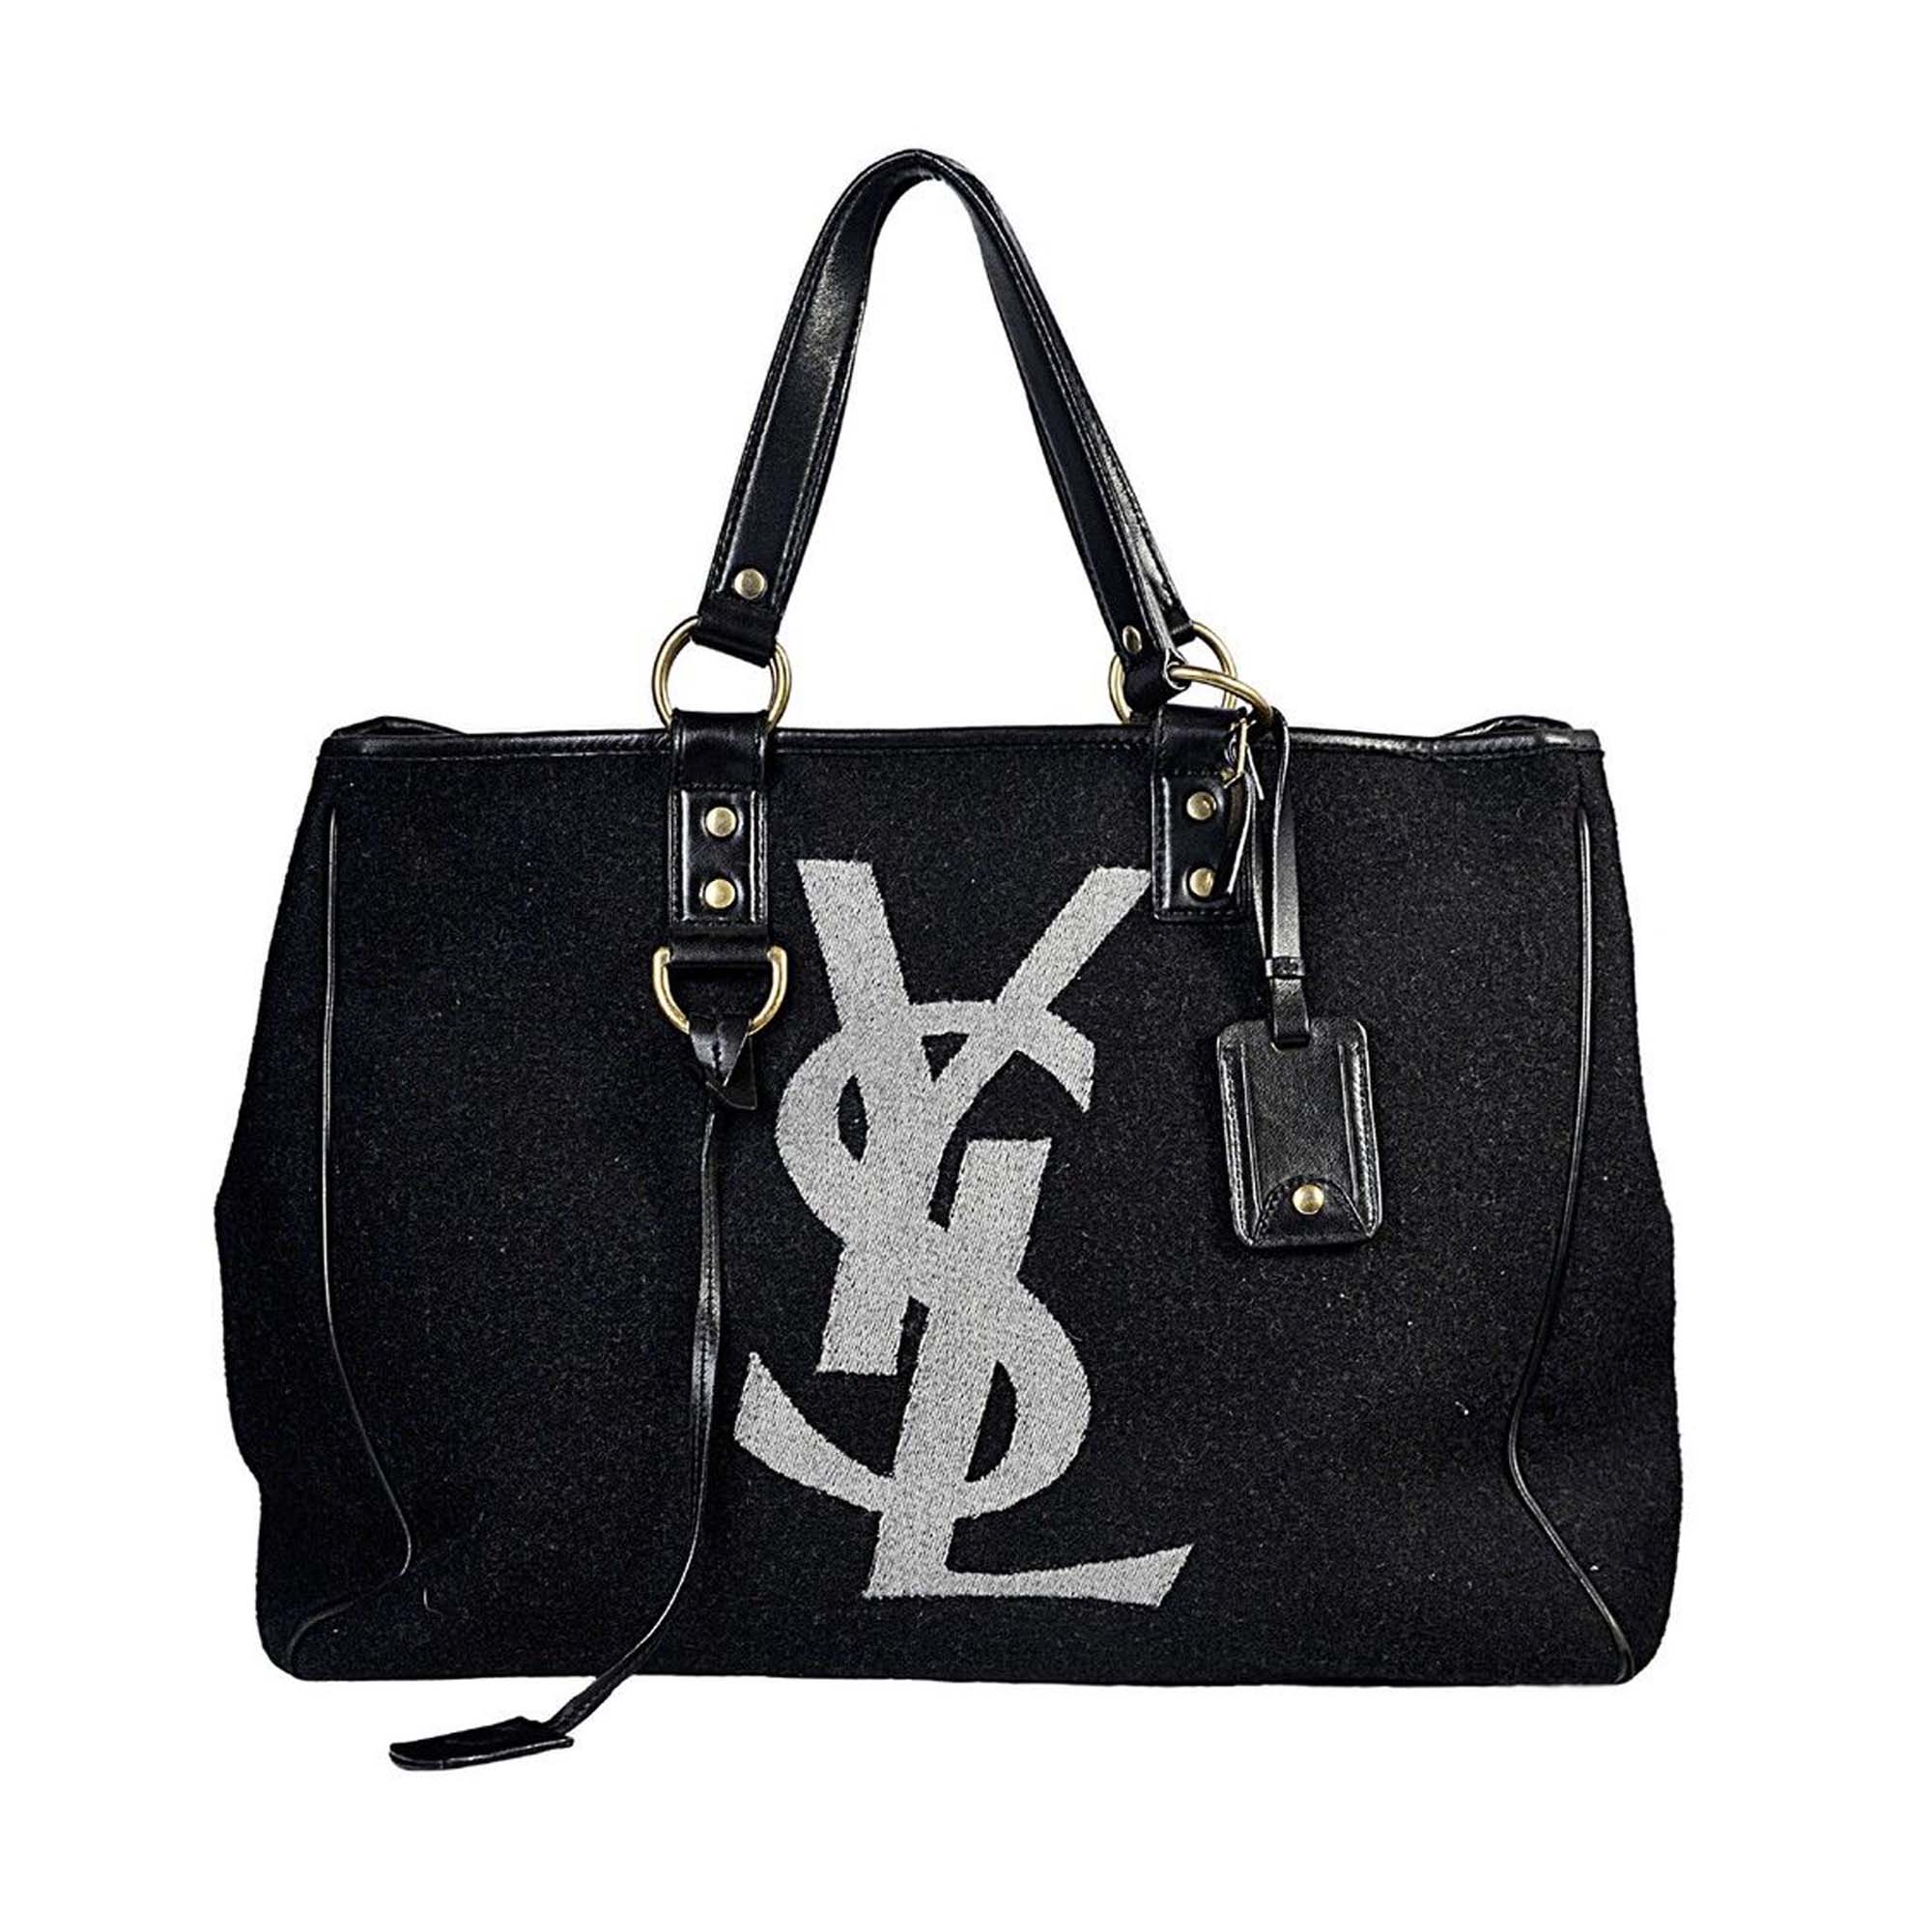 Details 61+ ysl bags on sale - in.cdgdbentre